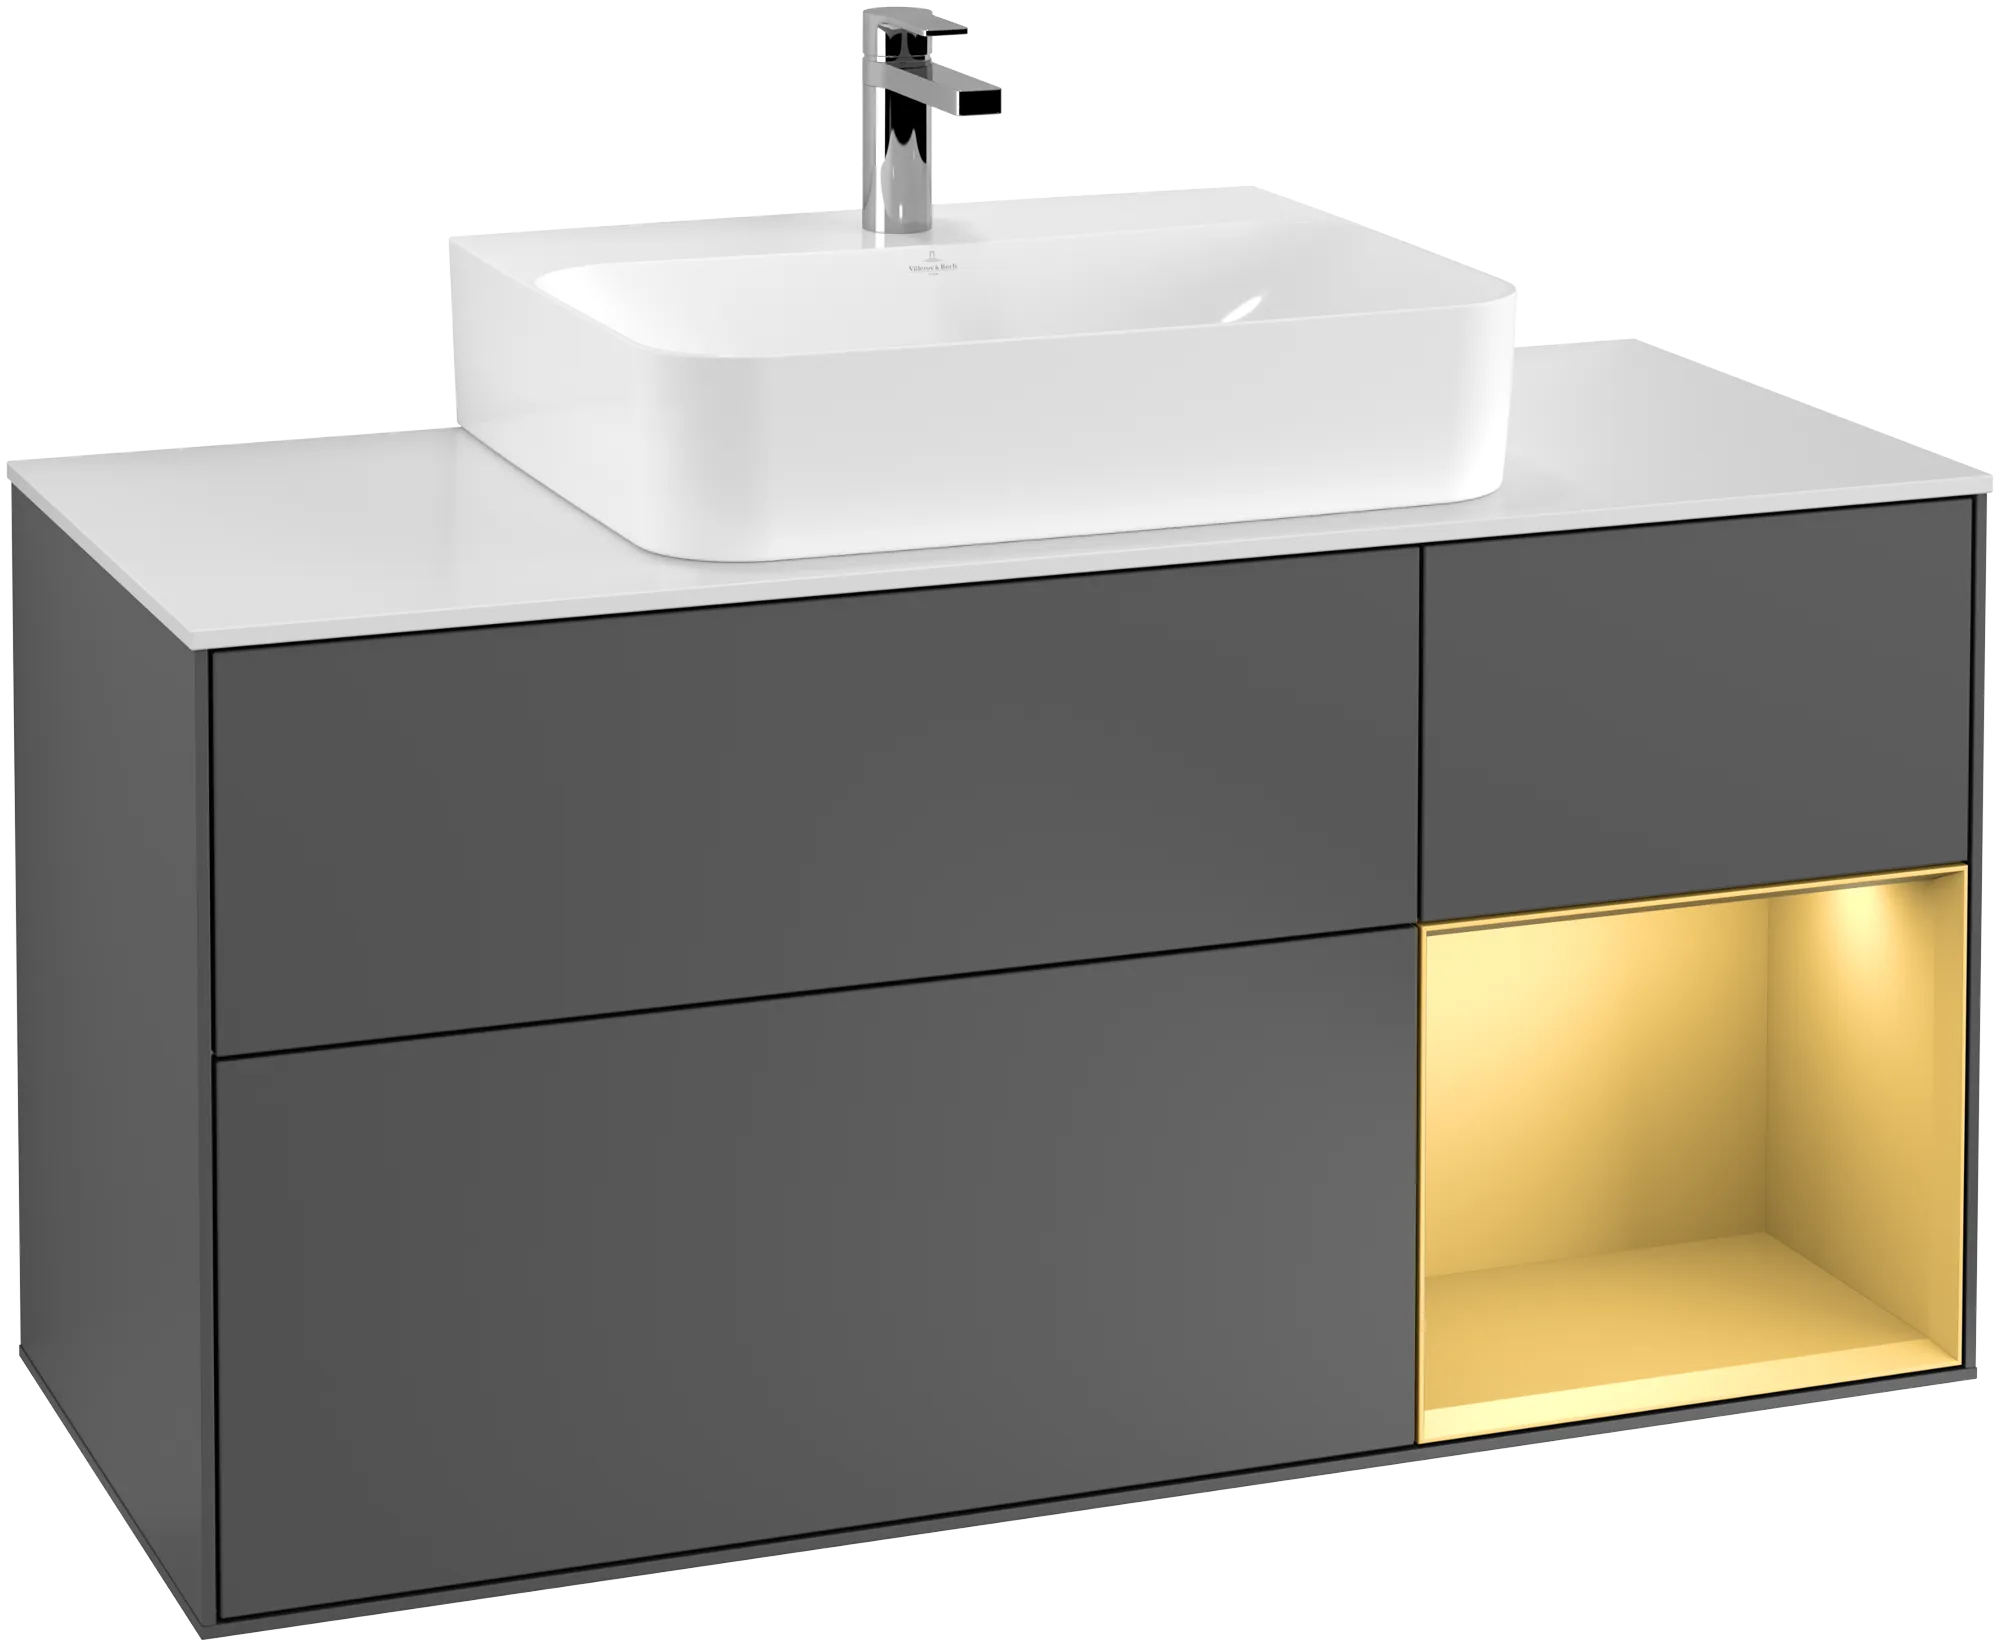 VILLEROY BOCH Finion Vanity unit, with lighting, 3 pull-out compartments, 1200 x 603 x 501 mm, Anthracite Matt Lacquer / Gold Matt Lacquer / Glass White Matt #G171HFGK resmi